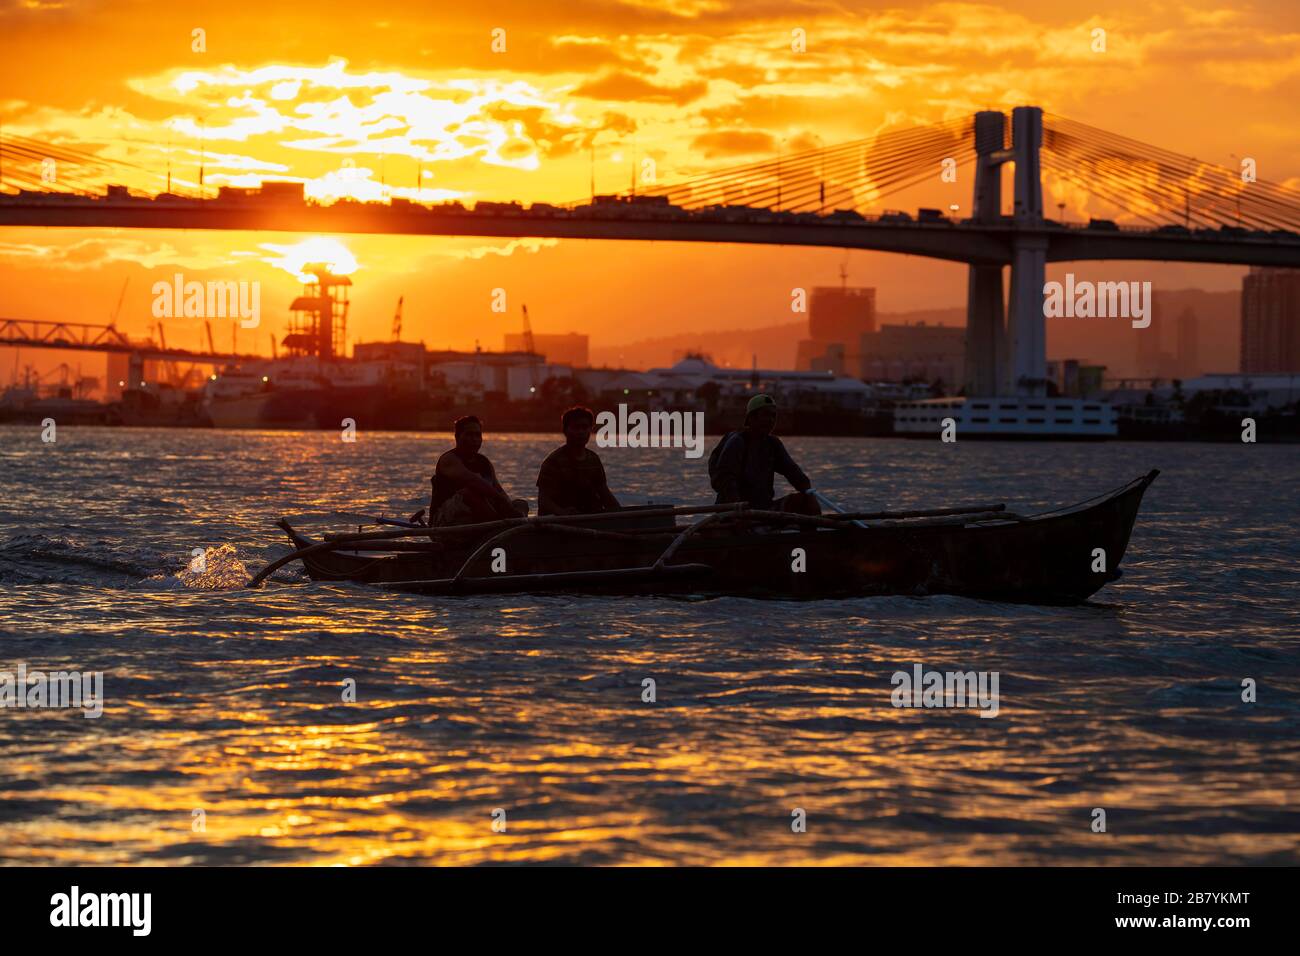 Three men at sunset in a handmade wooden canoe on the Mactan Channel in Cebu with the Marcelo B. Fernan Bridge in the background, Philippines. Stock Photo